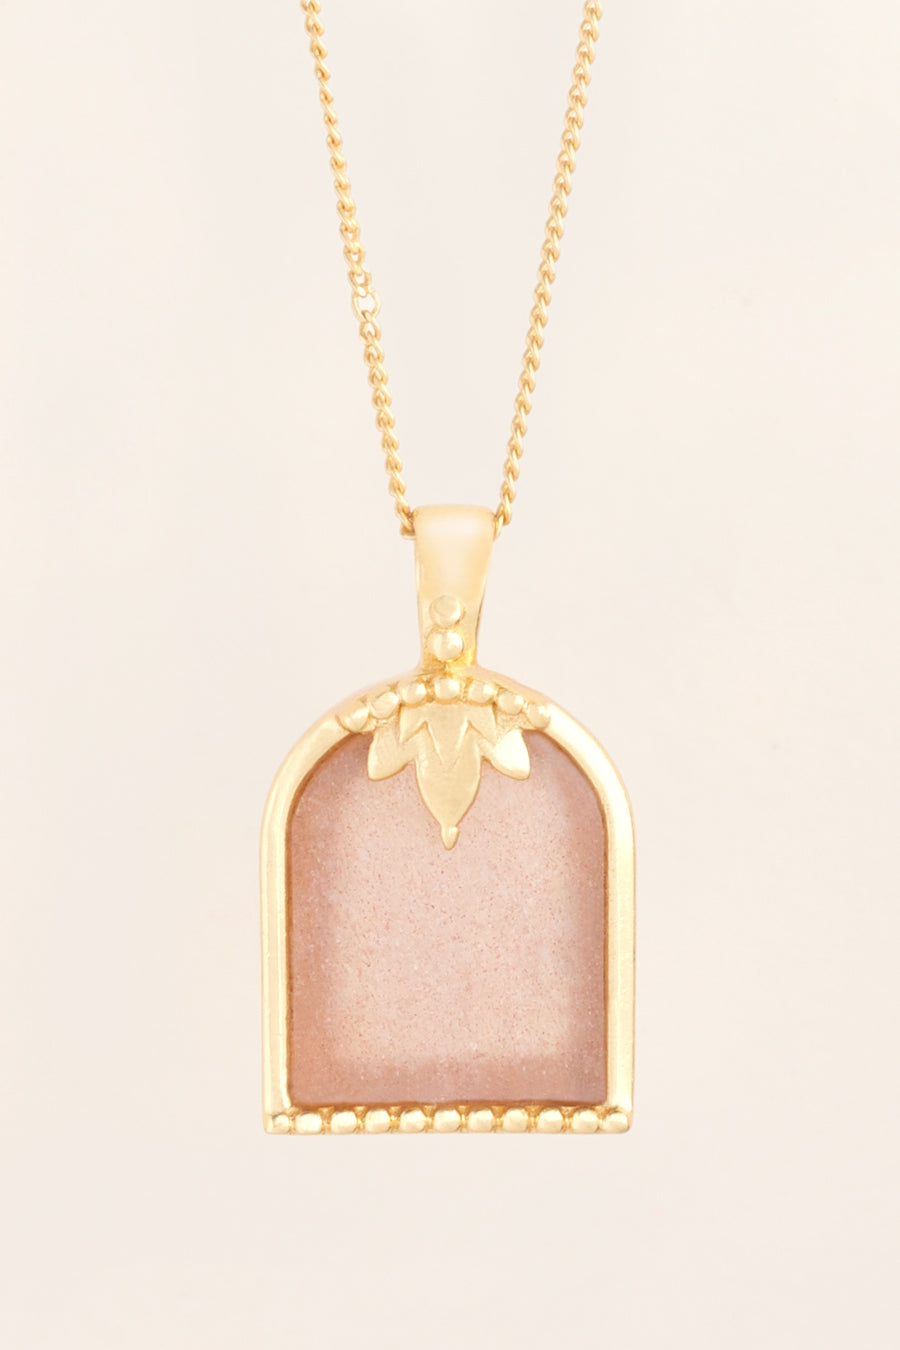 Arch Peach Moonstone Gold Necklace